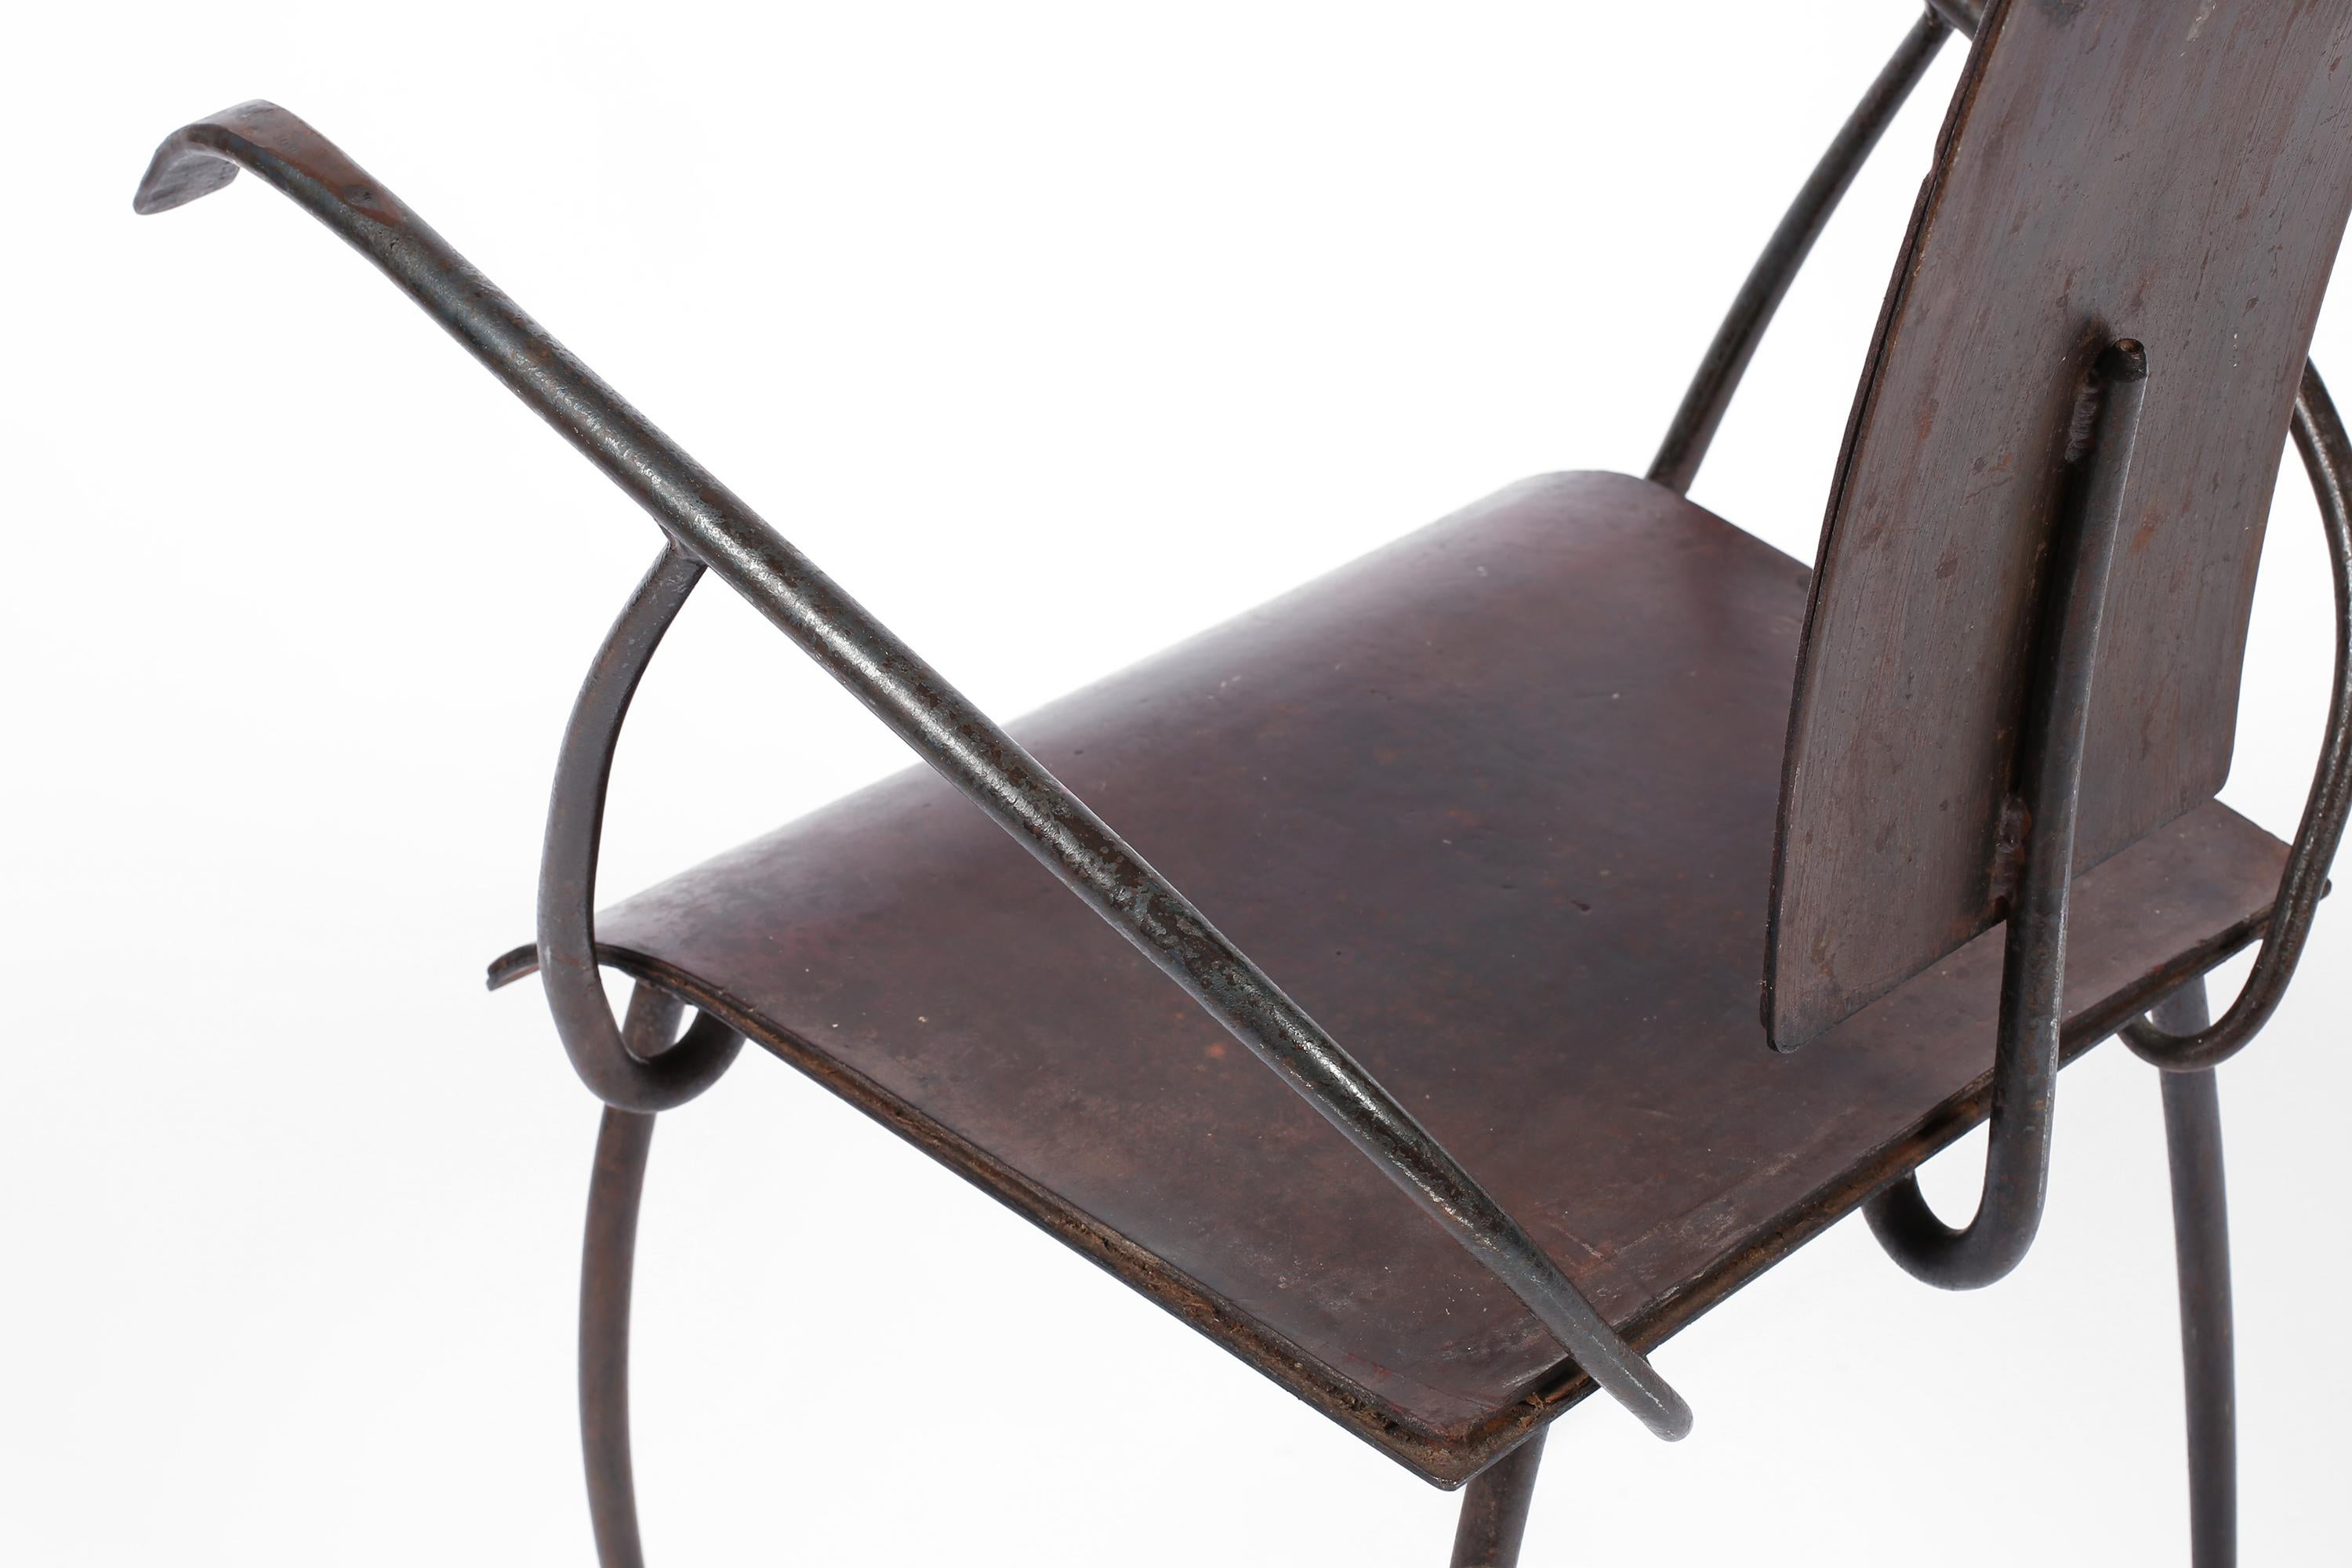 Artisanal French Modernist Iron and Leather Chair Midcentury Modern For Sale 1